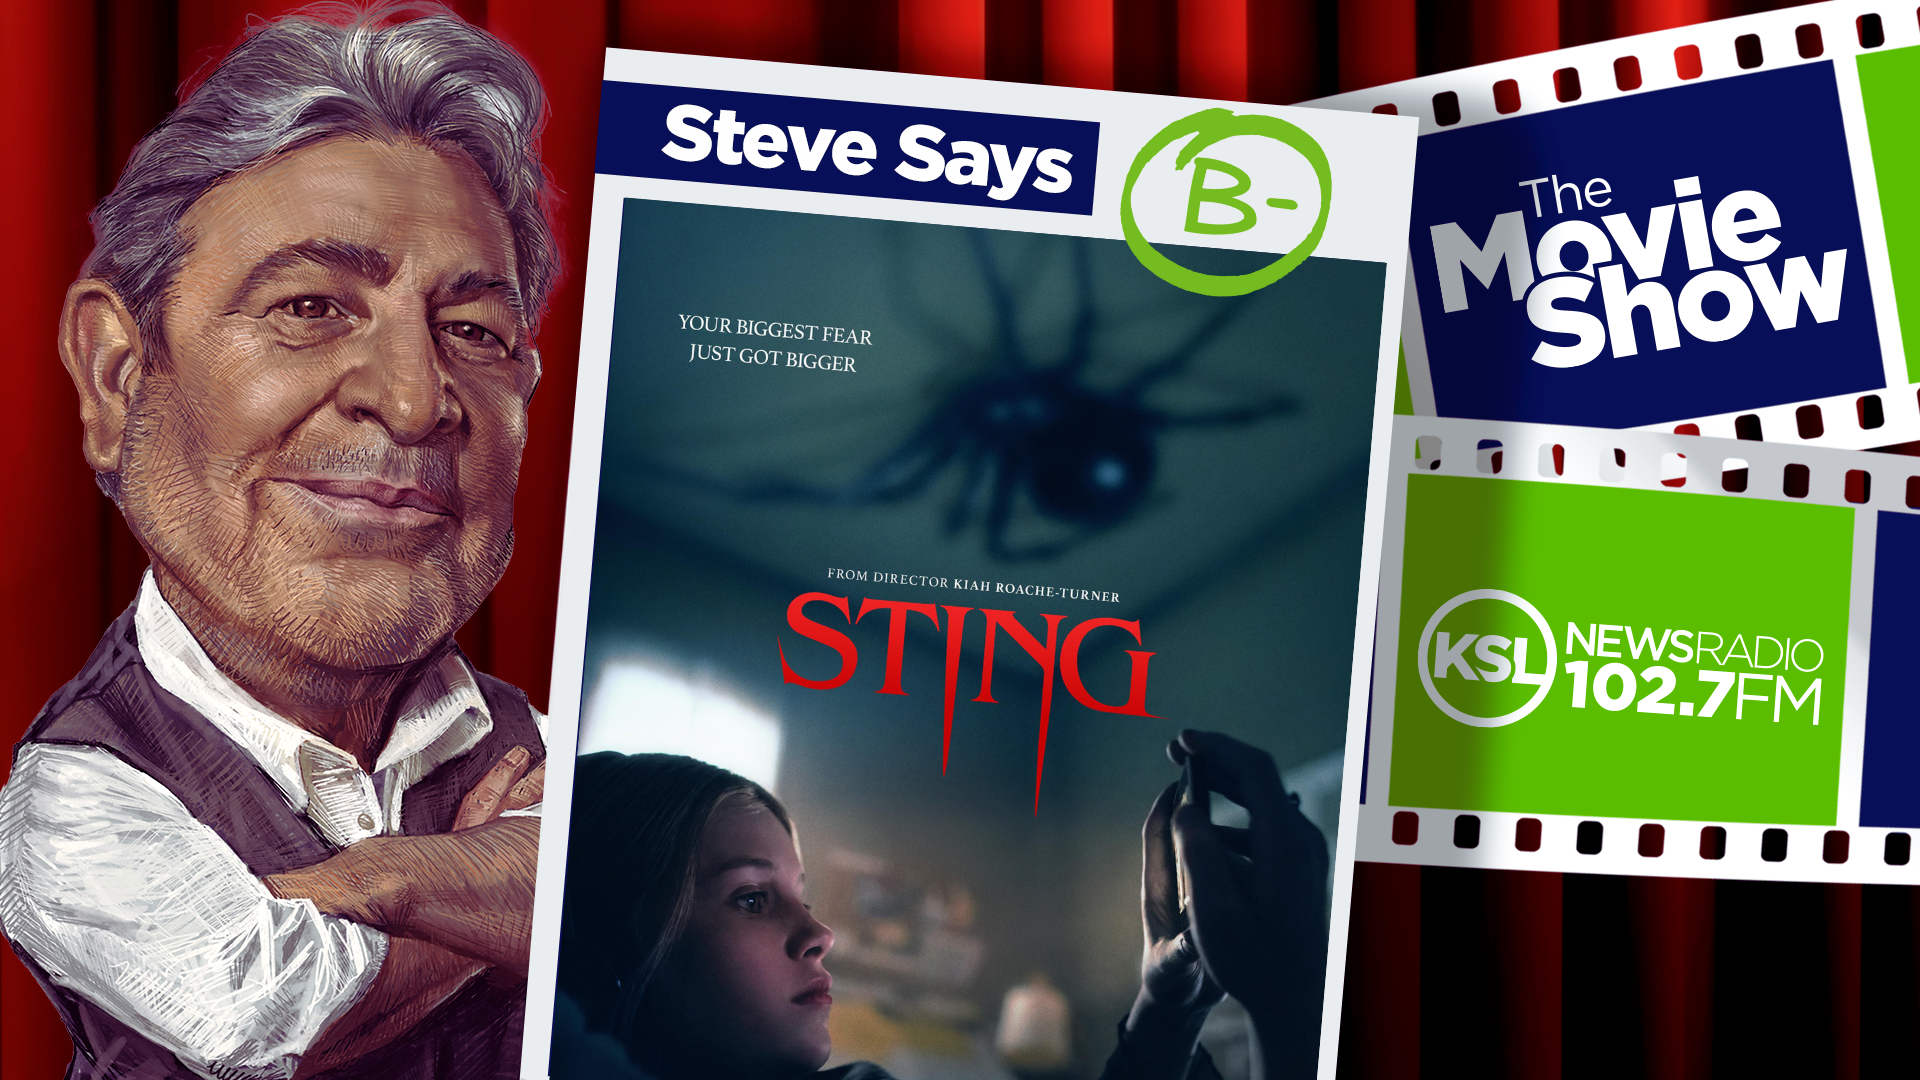 KSL Movie Review: Sting. After a meteor shower falls on Brooklyn, a young girl captures a super int...